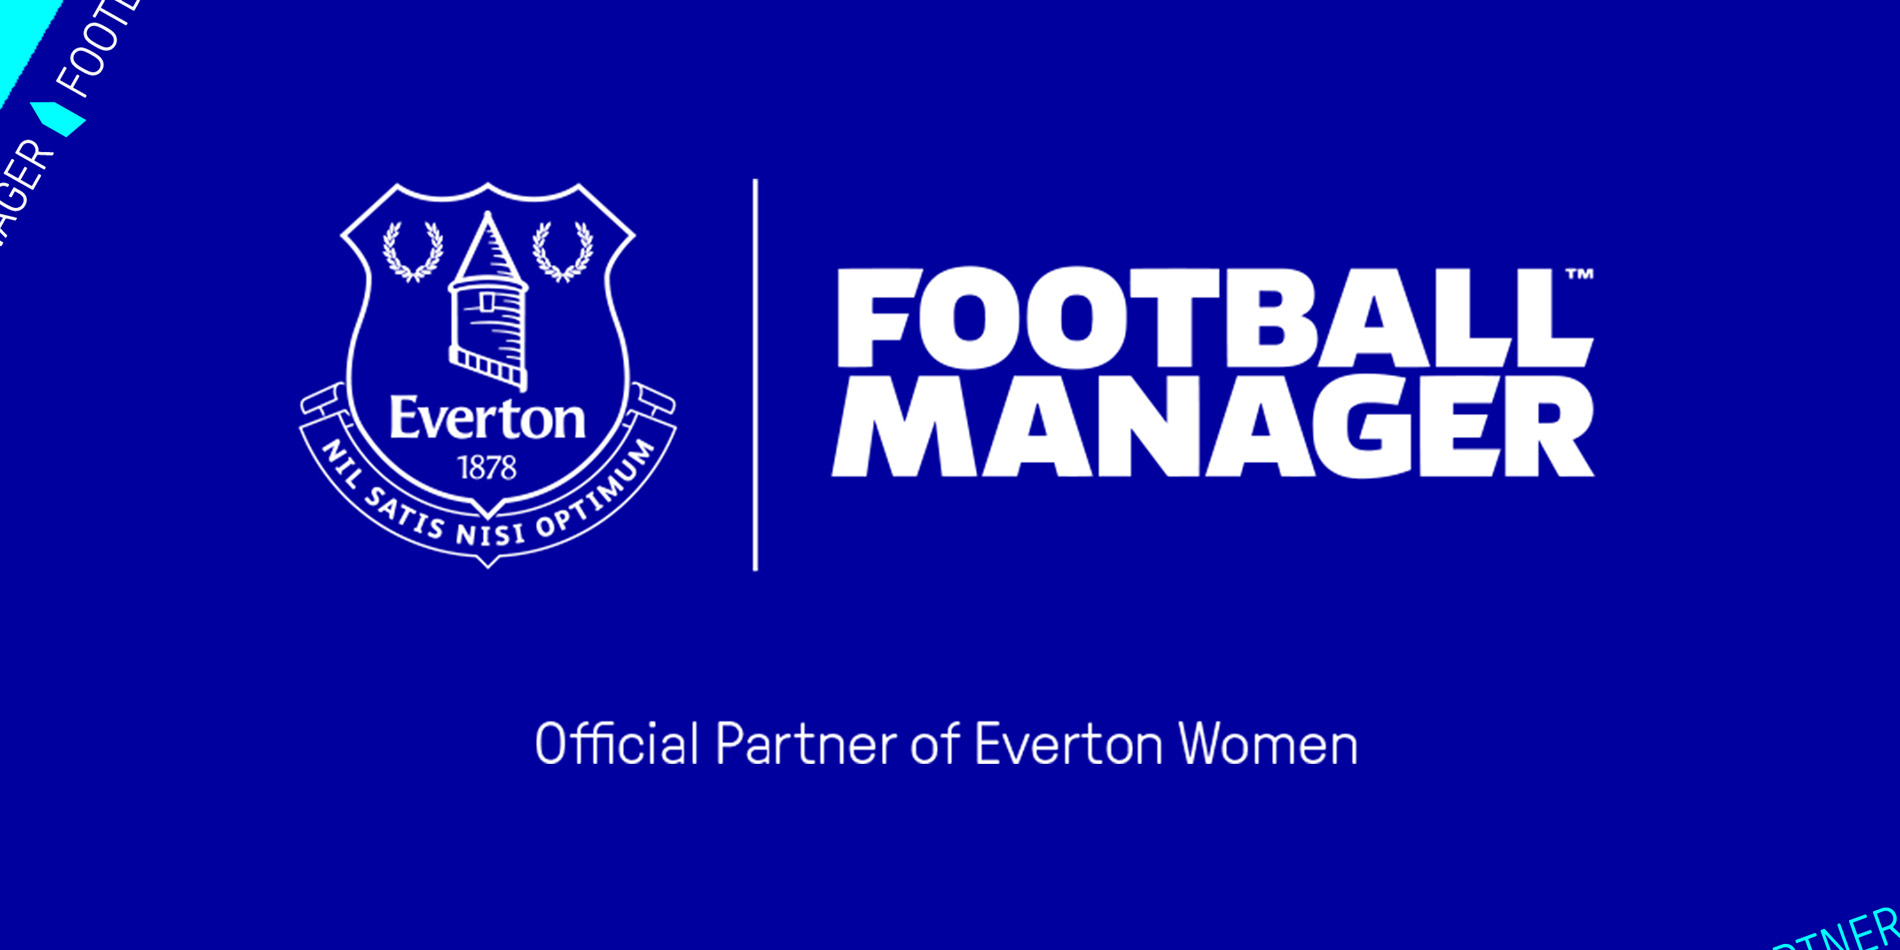 Everton Football Club continue as Football Manager Official Partner